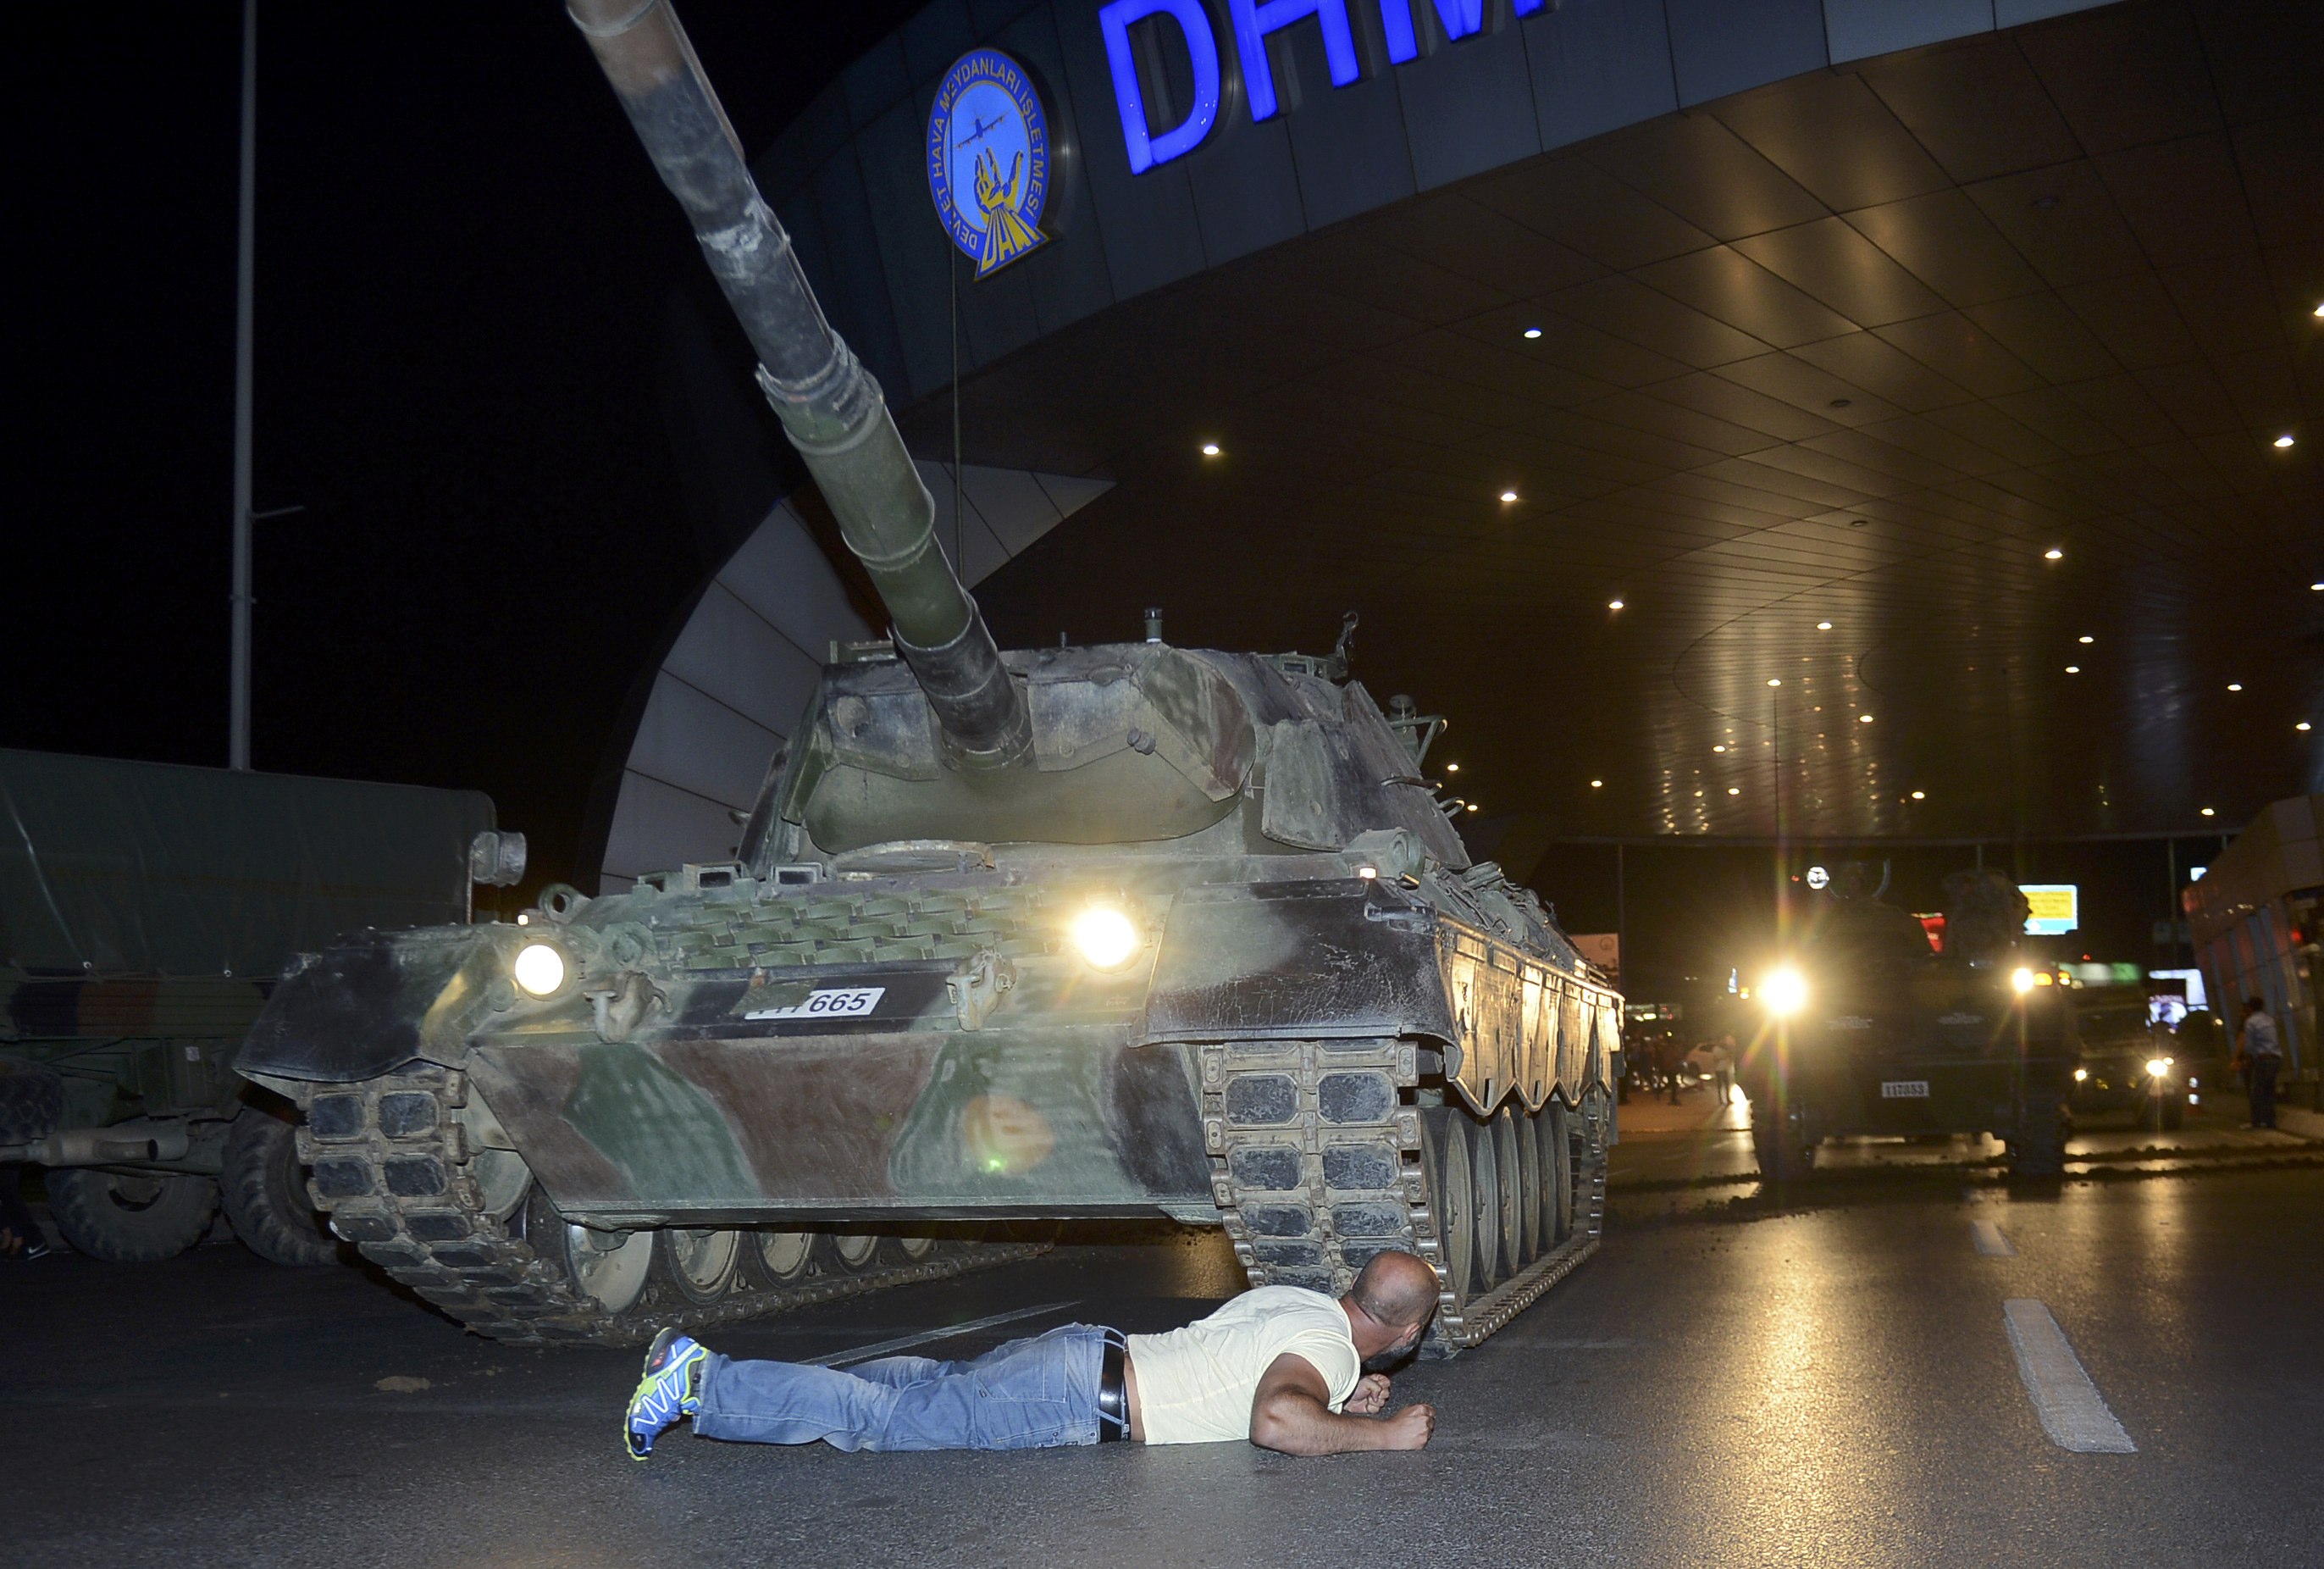 A man lies in front of a Turkish army tank at Ataturk airport in Istanbul, Turkey July 16, 2016. REUTERS/IHLAS News Agency NO SALES. NO ARCHIVES. TURKEY OUT. NO COMMERCIAL OR EDITORIAL SALES IN TURKEY.